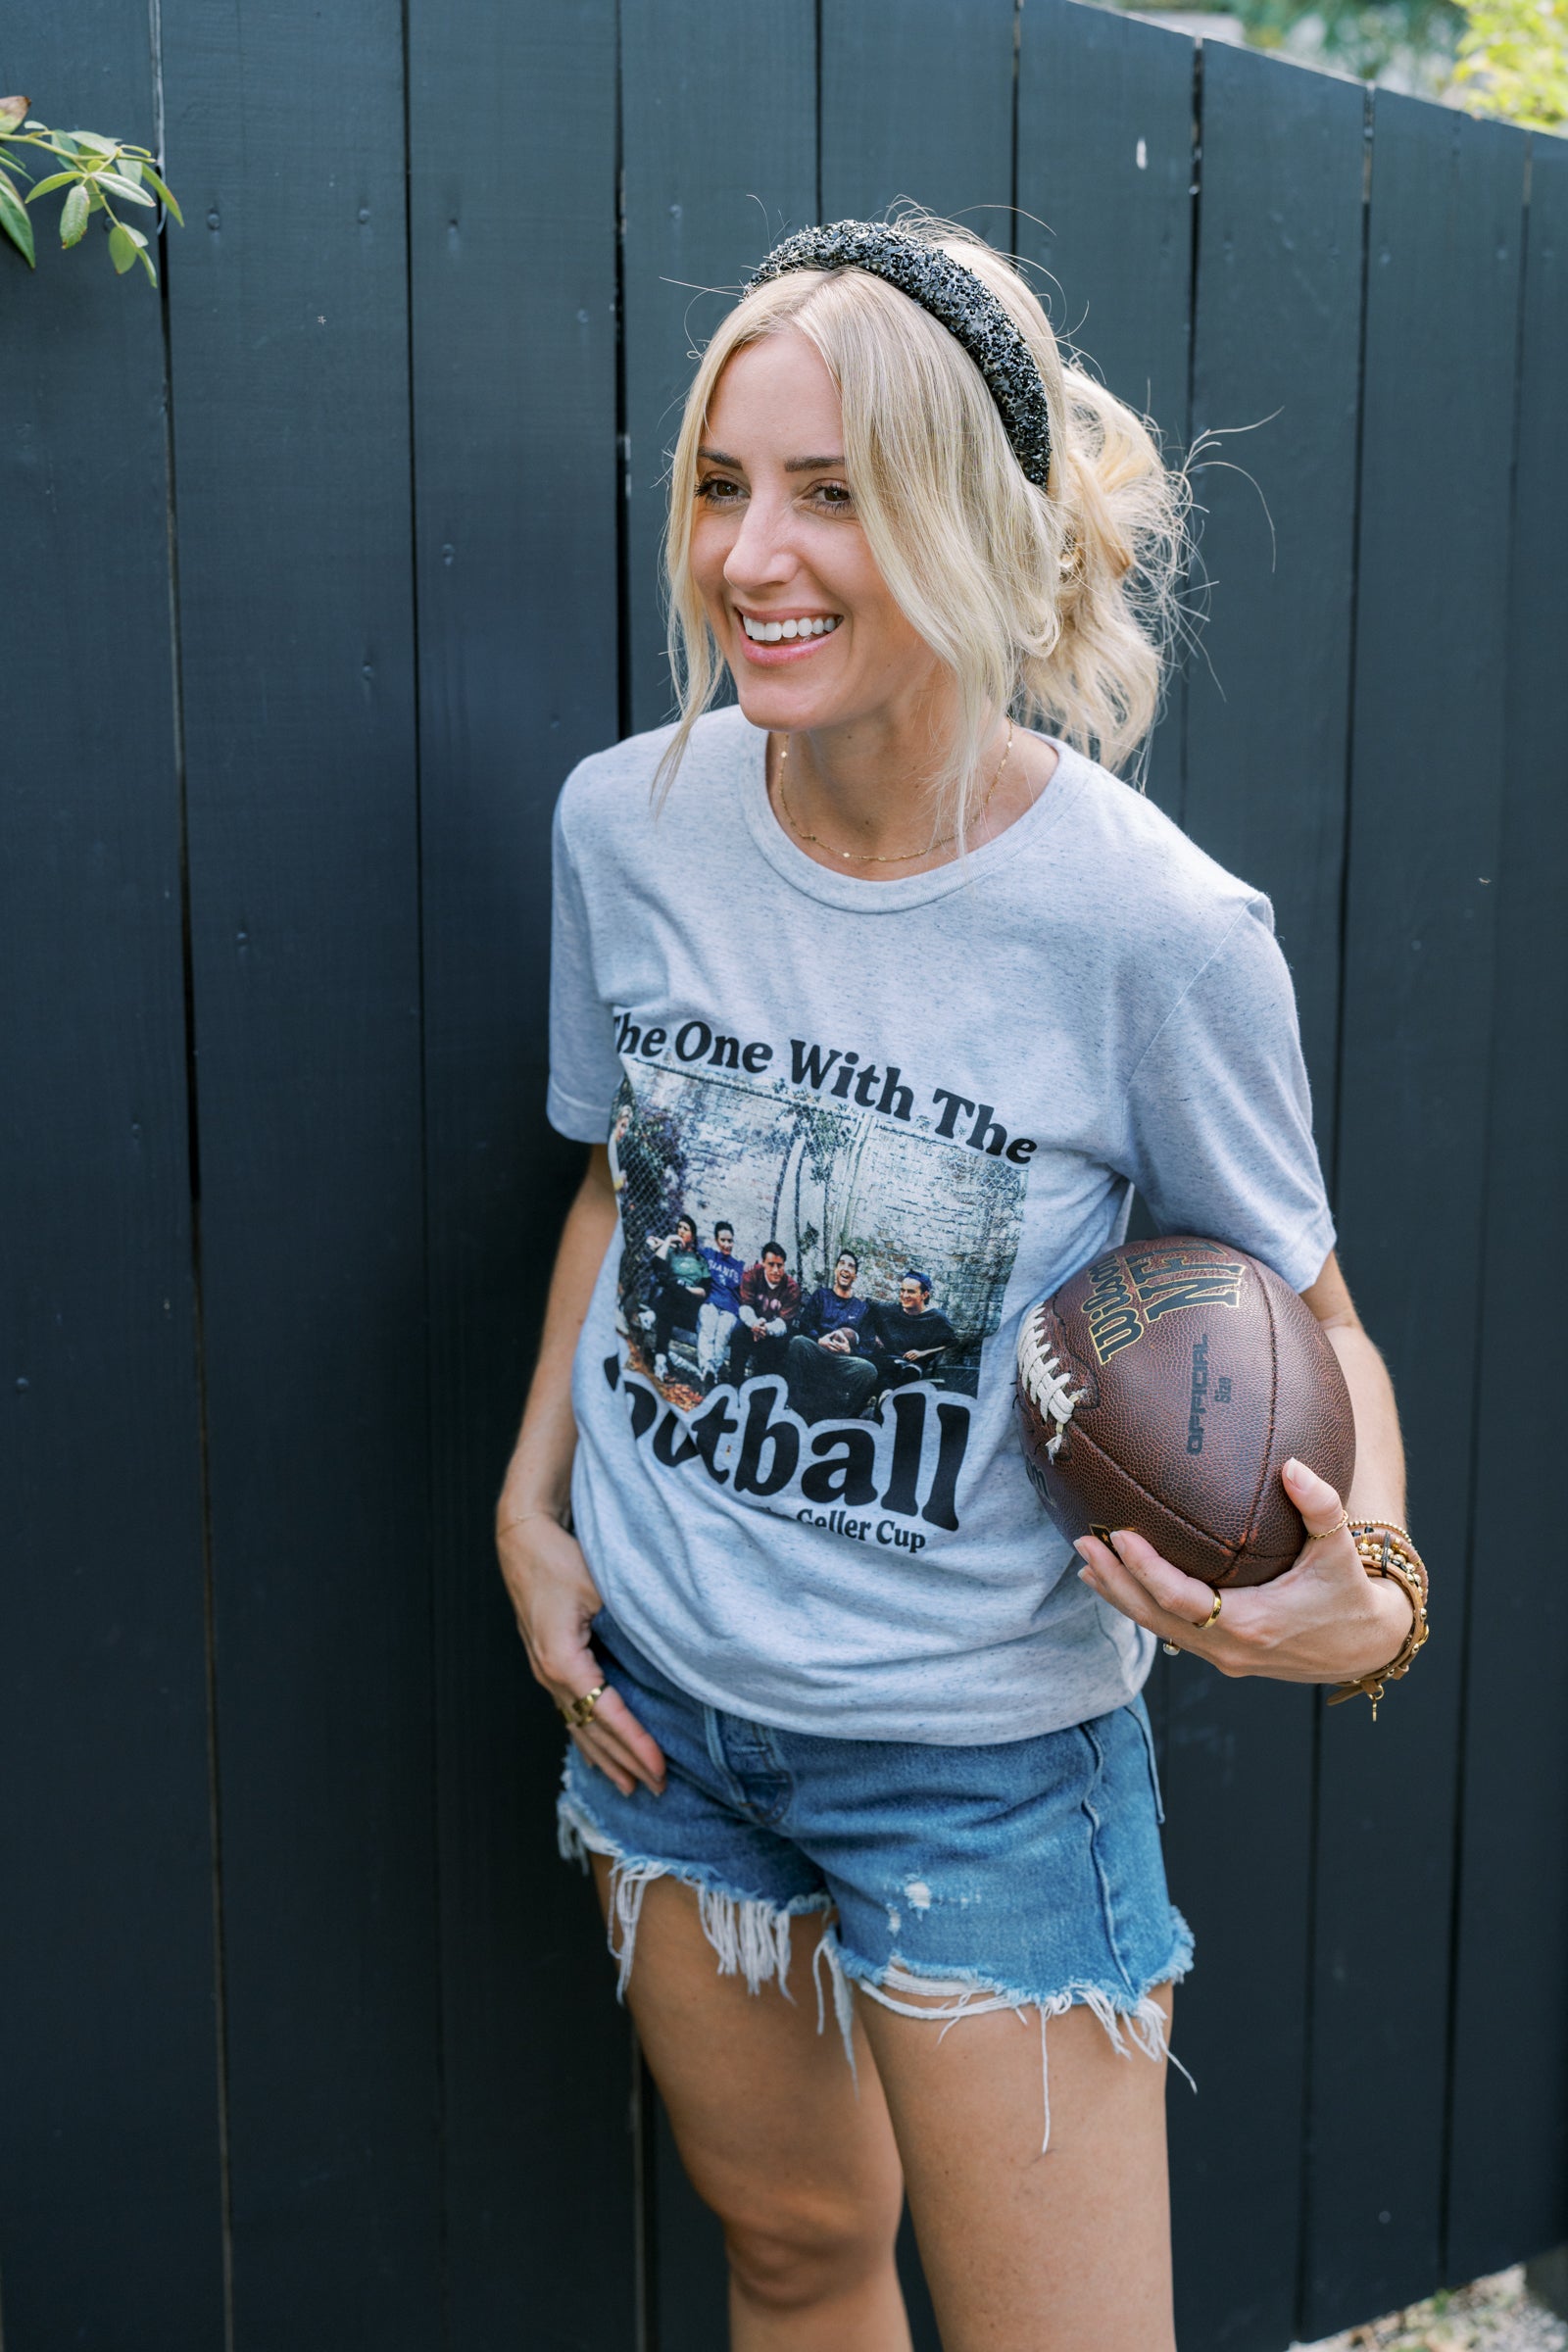 The One with the Football Tee